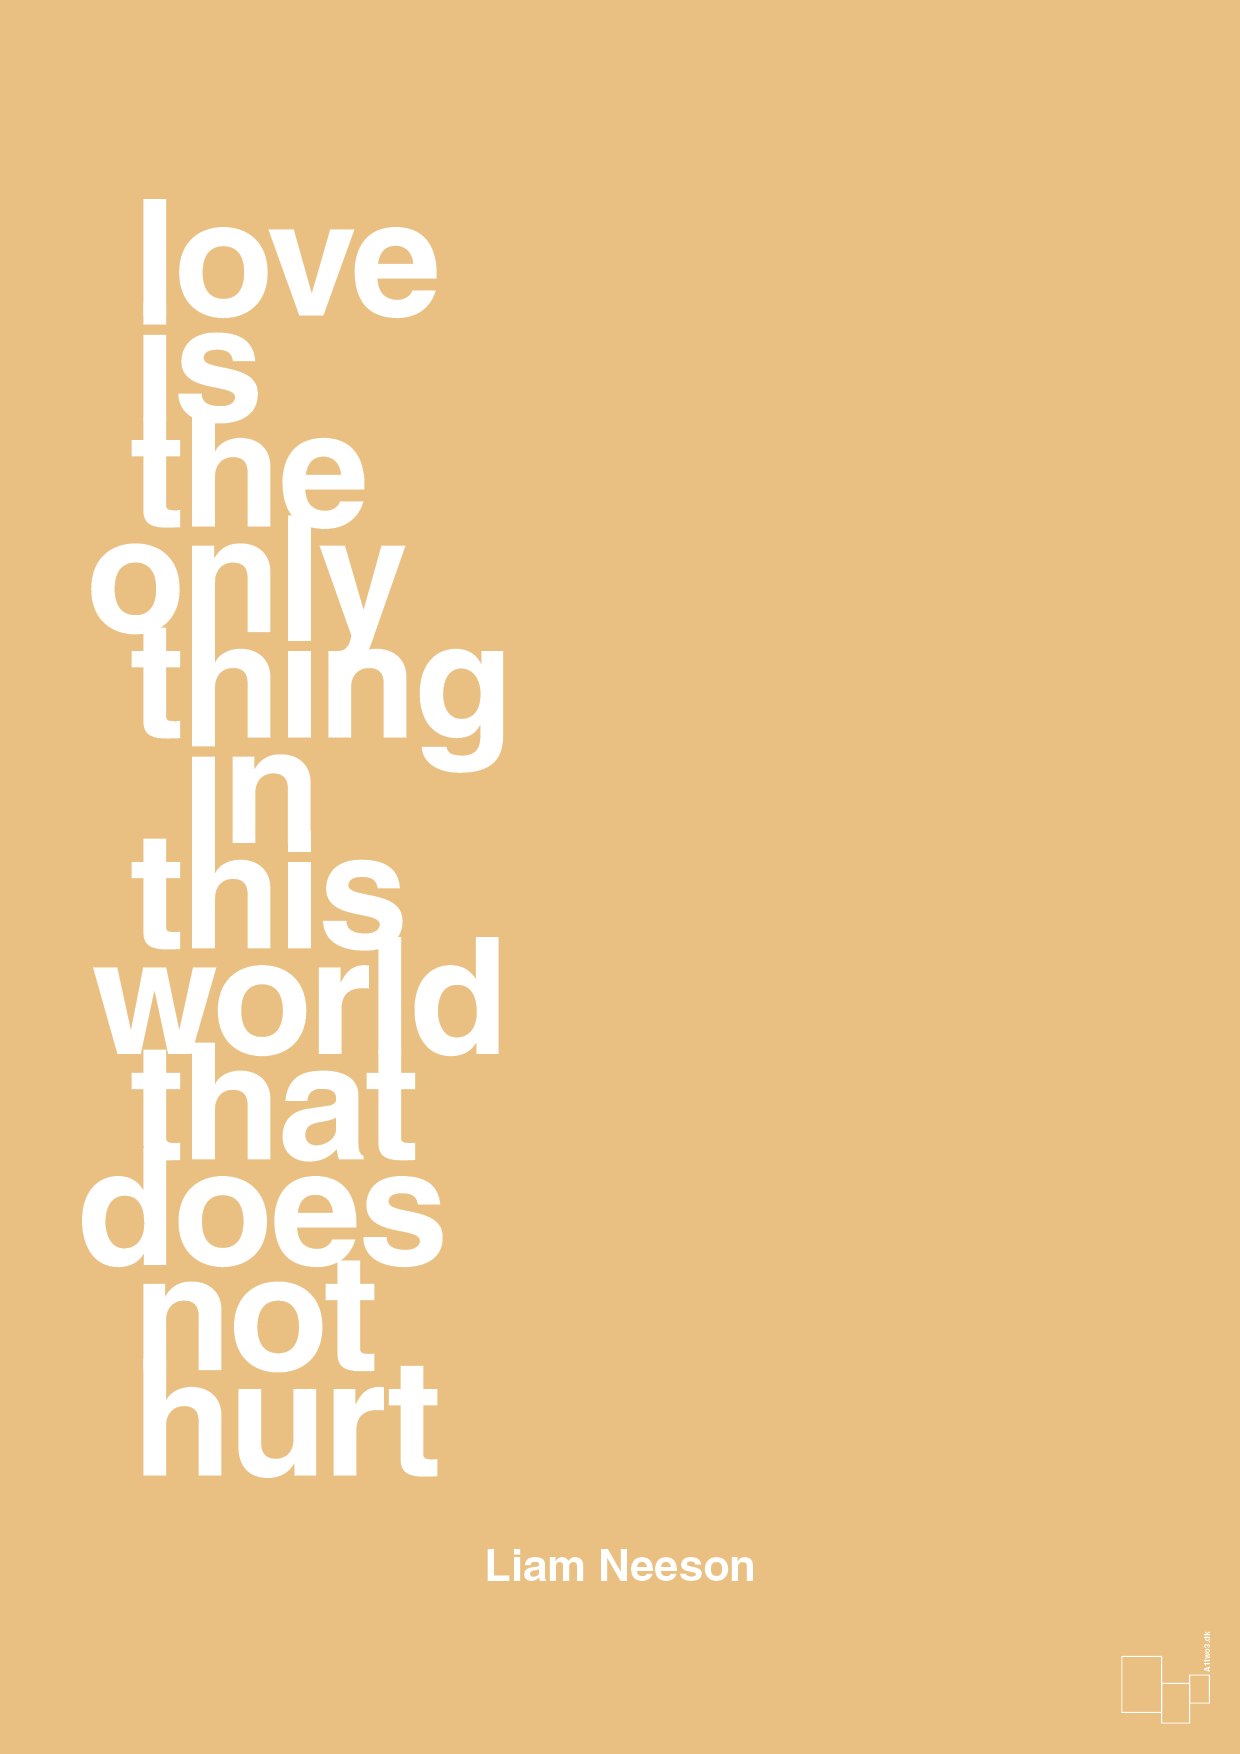 love is the only thing in this world that does not hurt - Plakat med Citater i Charismatic